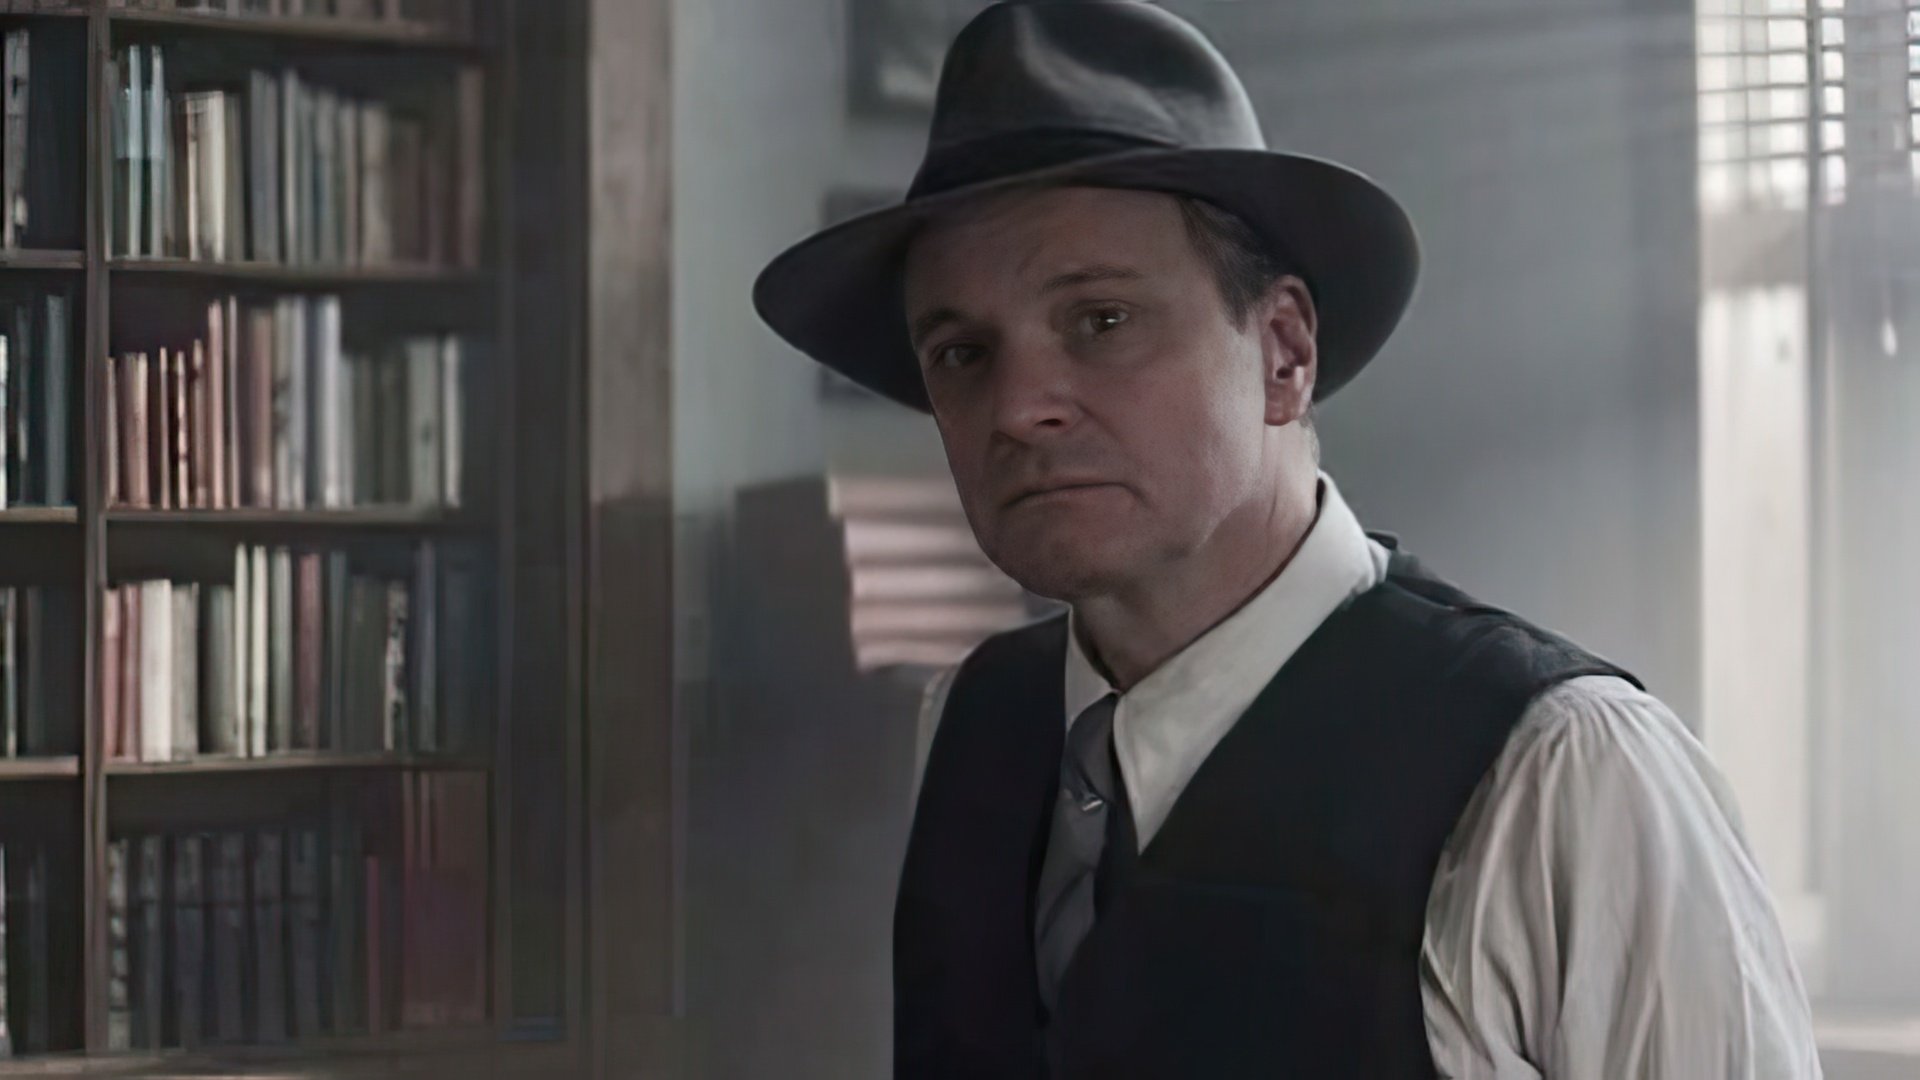 »Genius»: Colin Firth as publisher Mark Perkins